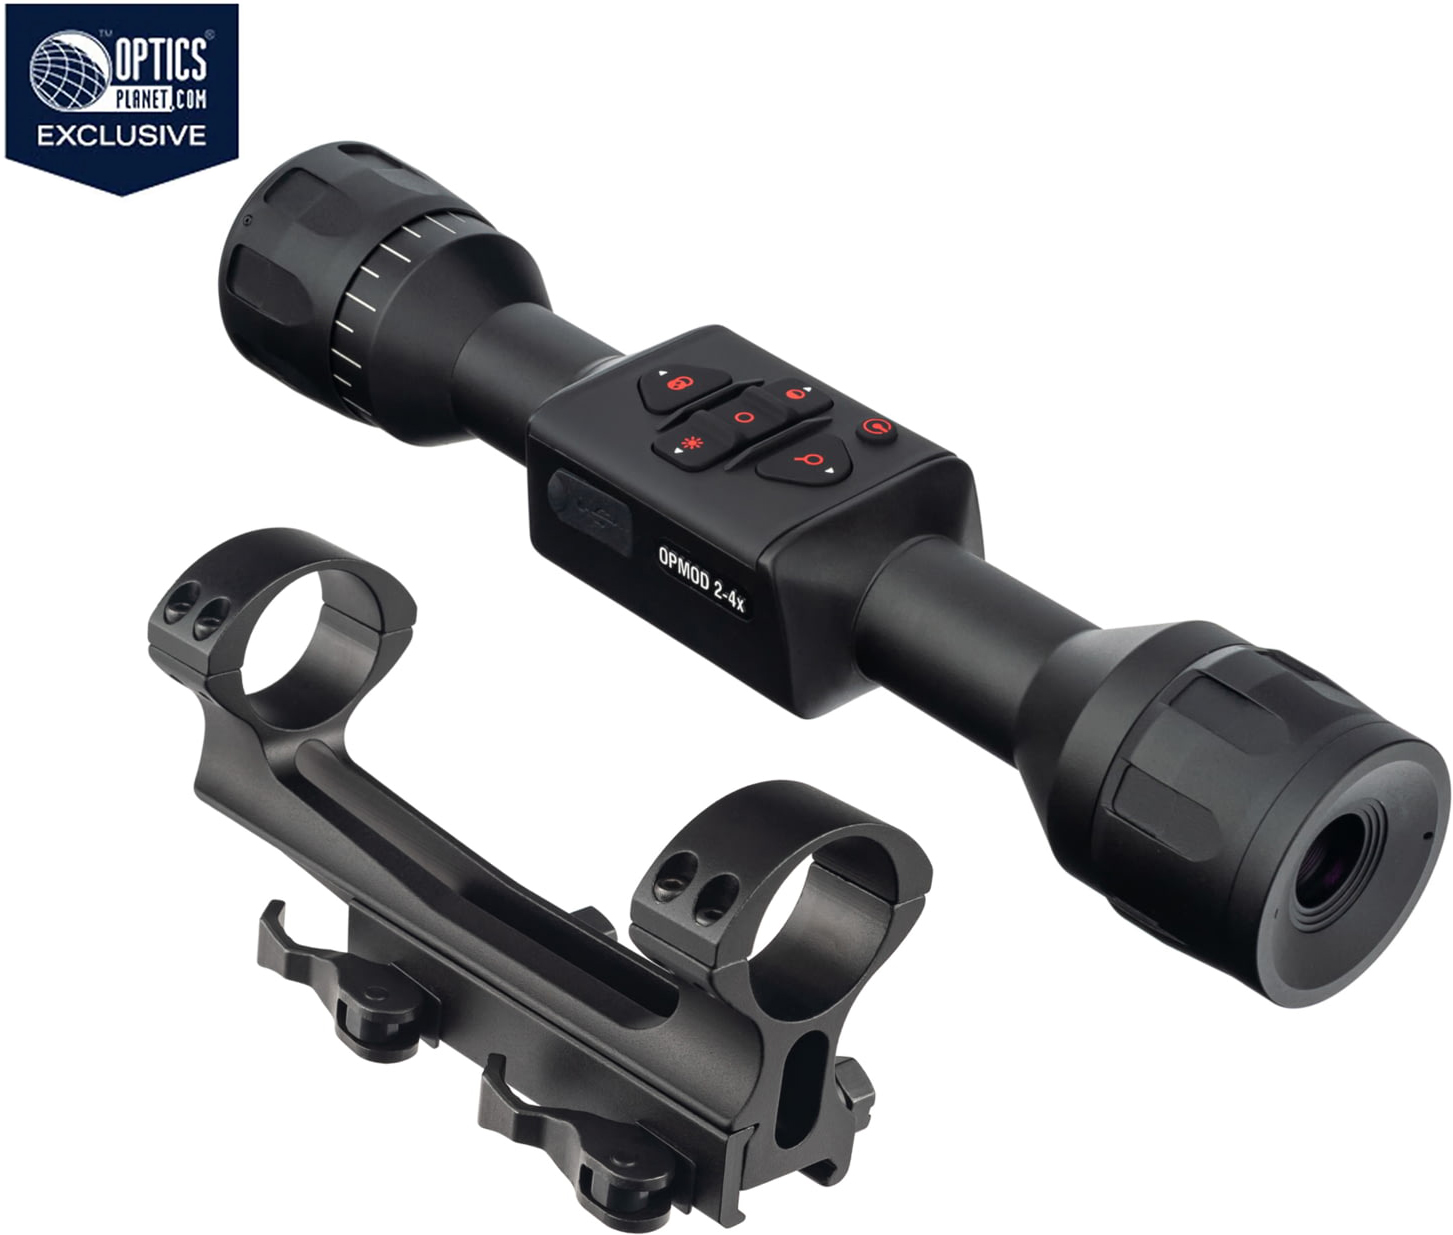 How to choose a thermal rifle scope?